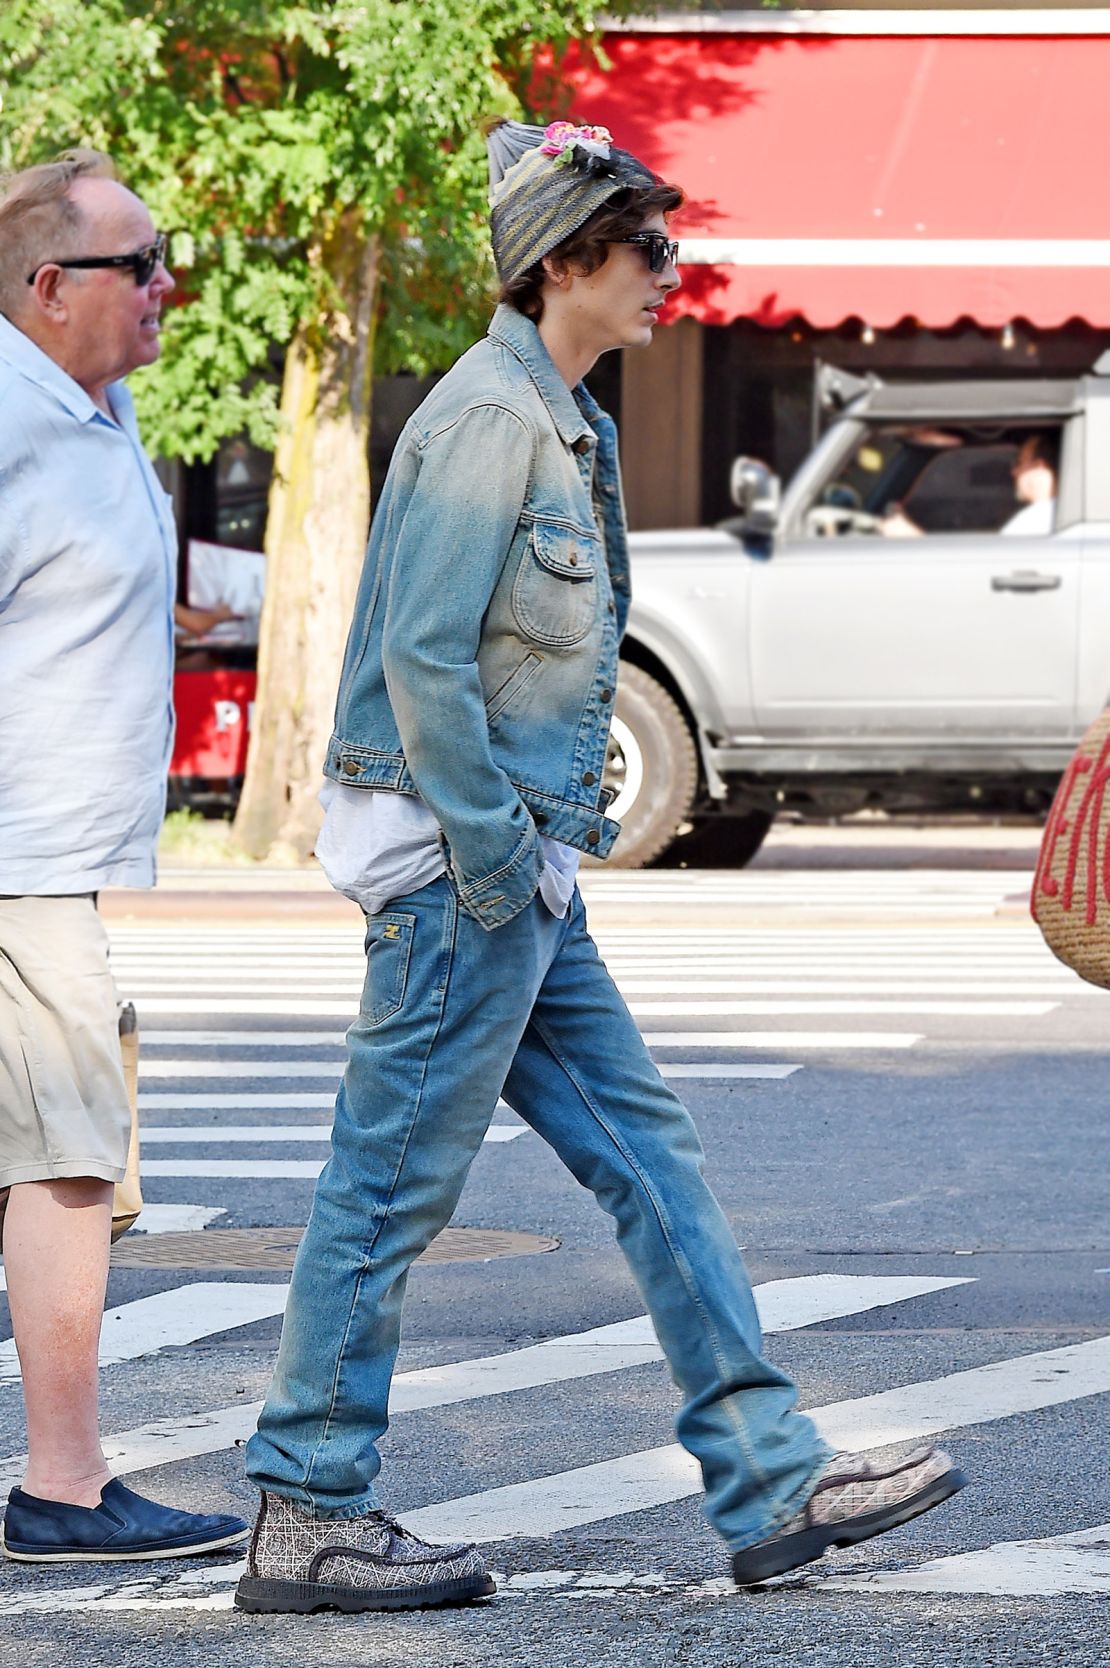 07/24/2023 EXCLUSIVE: Timothee Chalamet is spotted out in New York City. The 27 year old American actor who was dressed casually in a denim jacket paired with denim jeans was seen with famous rock n roll movement coach, Polly Bennett and dialect coach Tim Monich. Timothee is due to star in the upcoming Bob Dylan biopic.

VIDEO AVAILABLE

sales@theimagedirect.com Please byline:TheImageDirect.com

*EXCLUSIVE PLEASE EMAIL sales@theimagedirect.com FOR FEES BEFORE USE